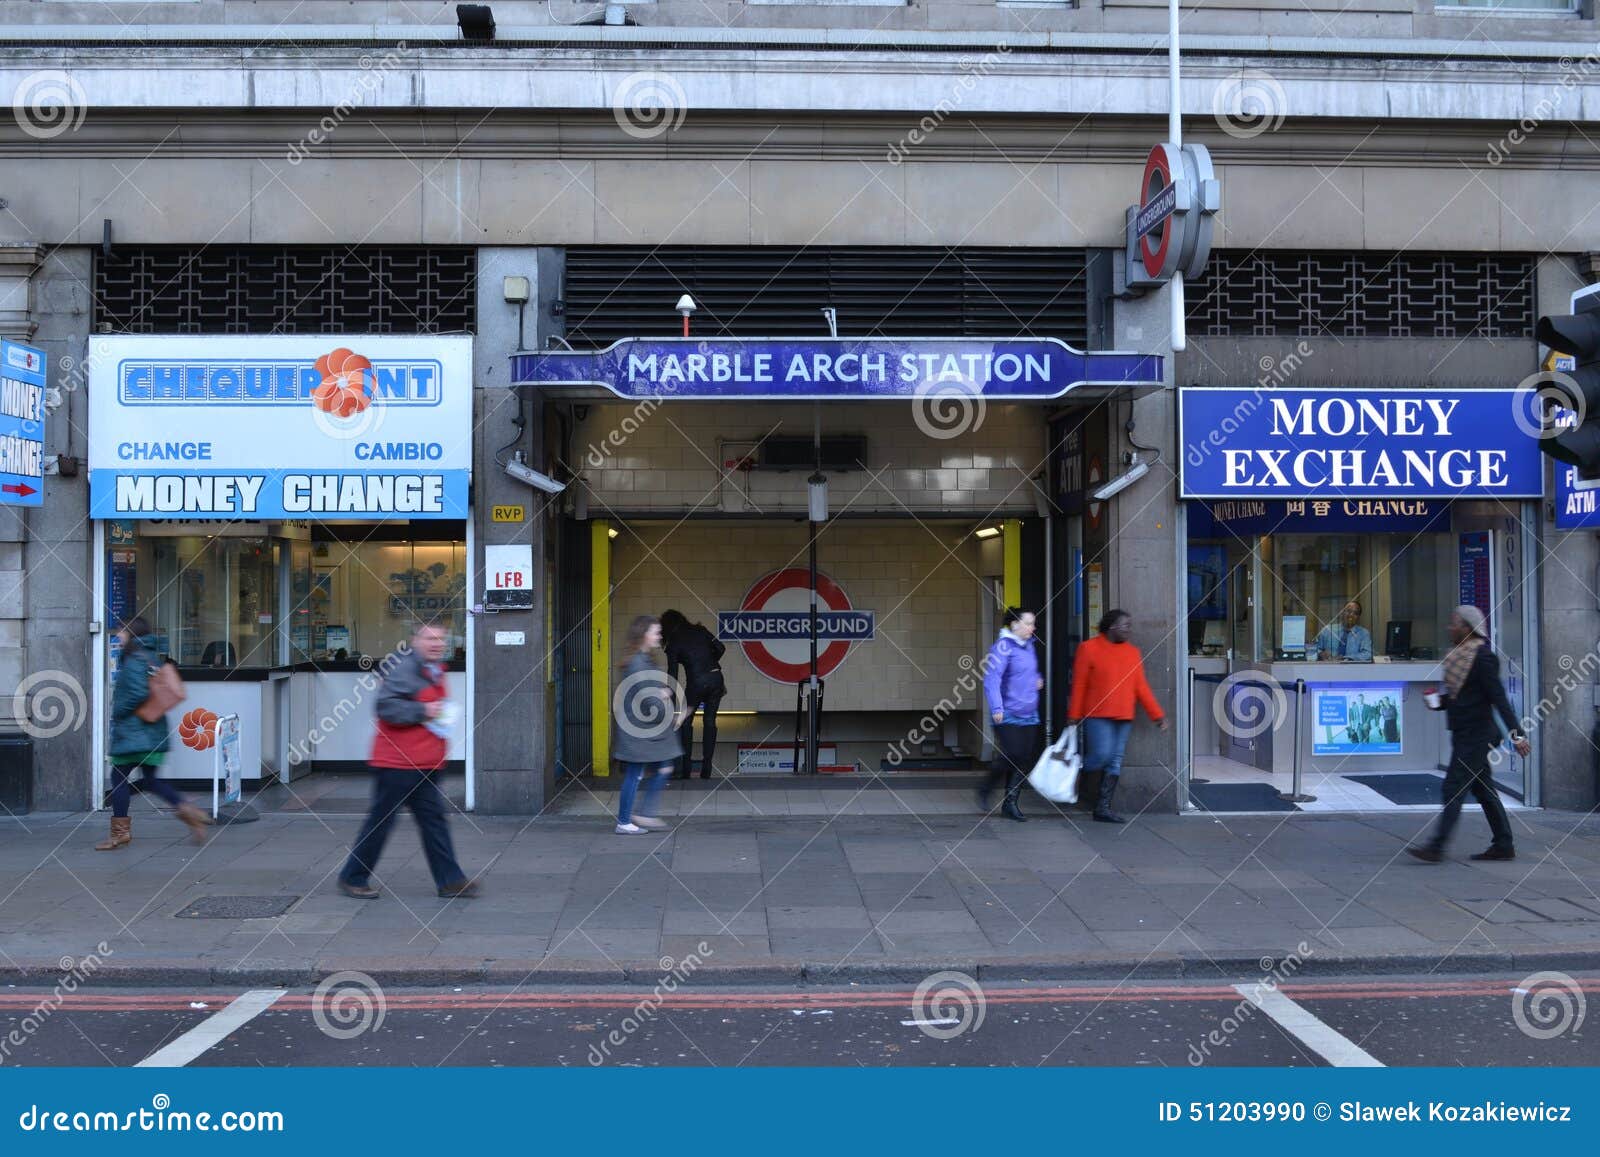 London Marble Arch Underground Station Entrance Editorial